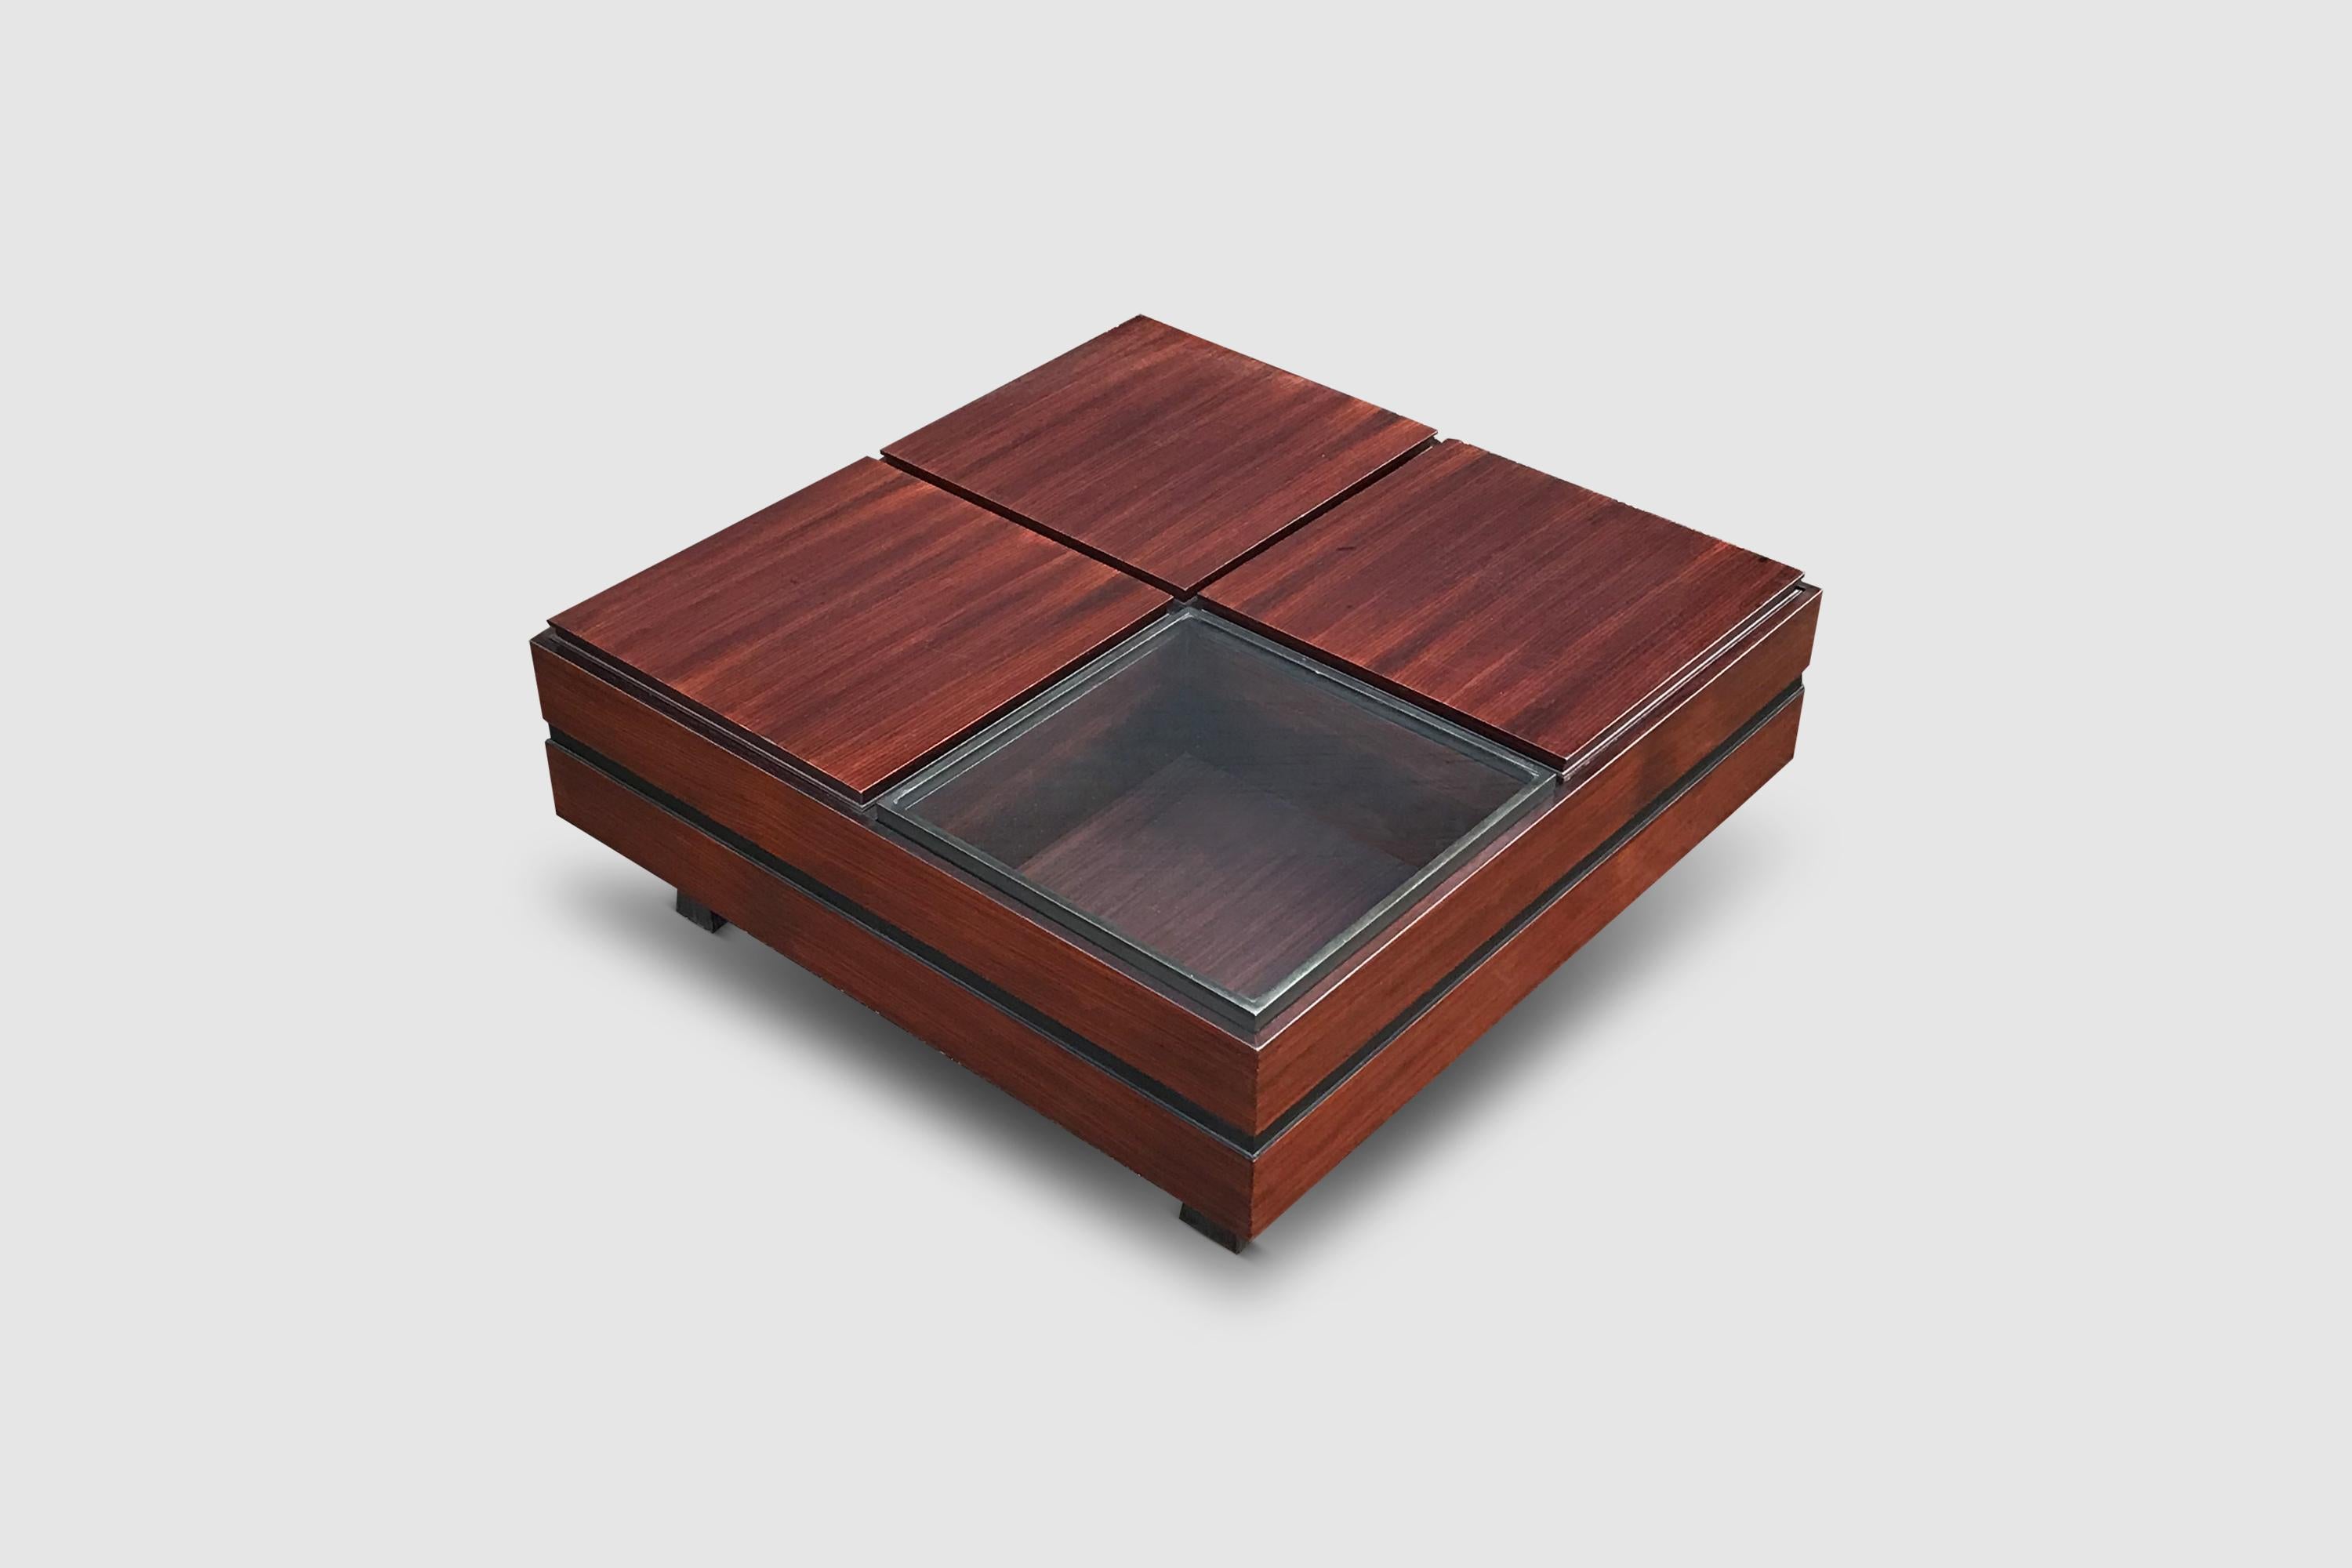 Functional and compartmented teak wood coffee table designed by Carlo Hauner and manufactured by Forma italy 1961.

The table is compartmented into 4 different segments, each segment can be used as a storage compartment thereby providing